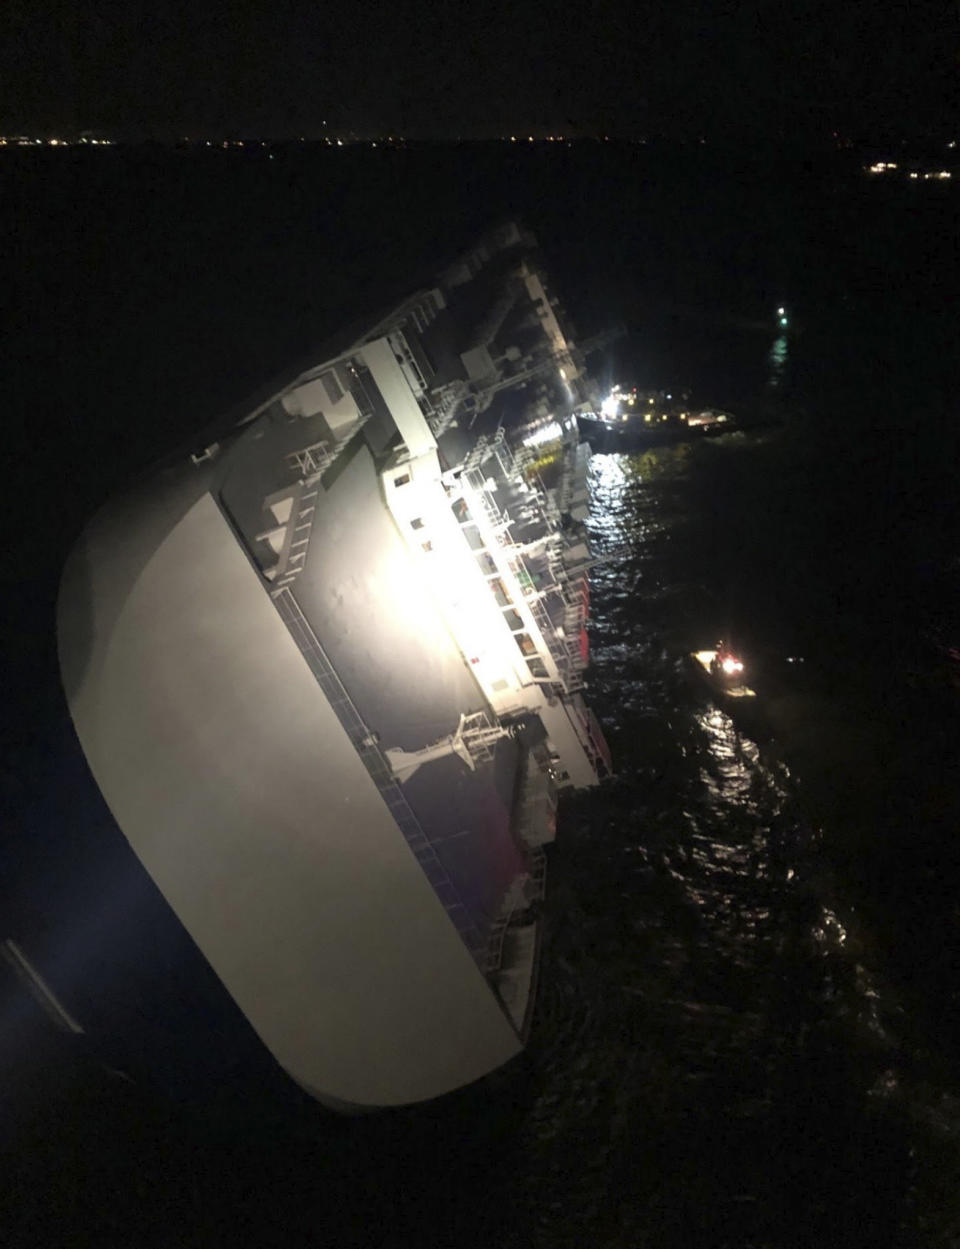 In this photo provided by the U.S. Coast Guard, the Golden Ray cargo ship lists to one side near a port on the Georgia coast, early Sunday, Sept. 8, 2019. The ship, carrying vehicles, was being evacuated after sharply listing. The U.S. Coast Guard said the vessel was leaving Brunswick when it somehow turned drastically sideways early Sunday. (U.S. Coast Guard via AP)